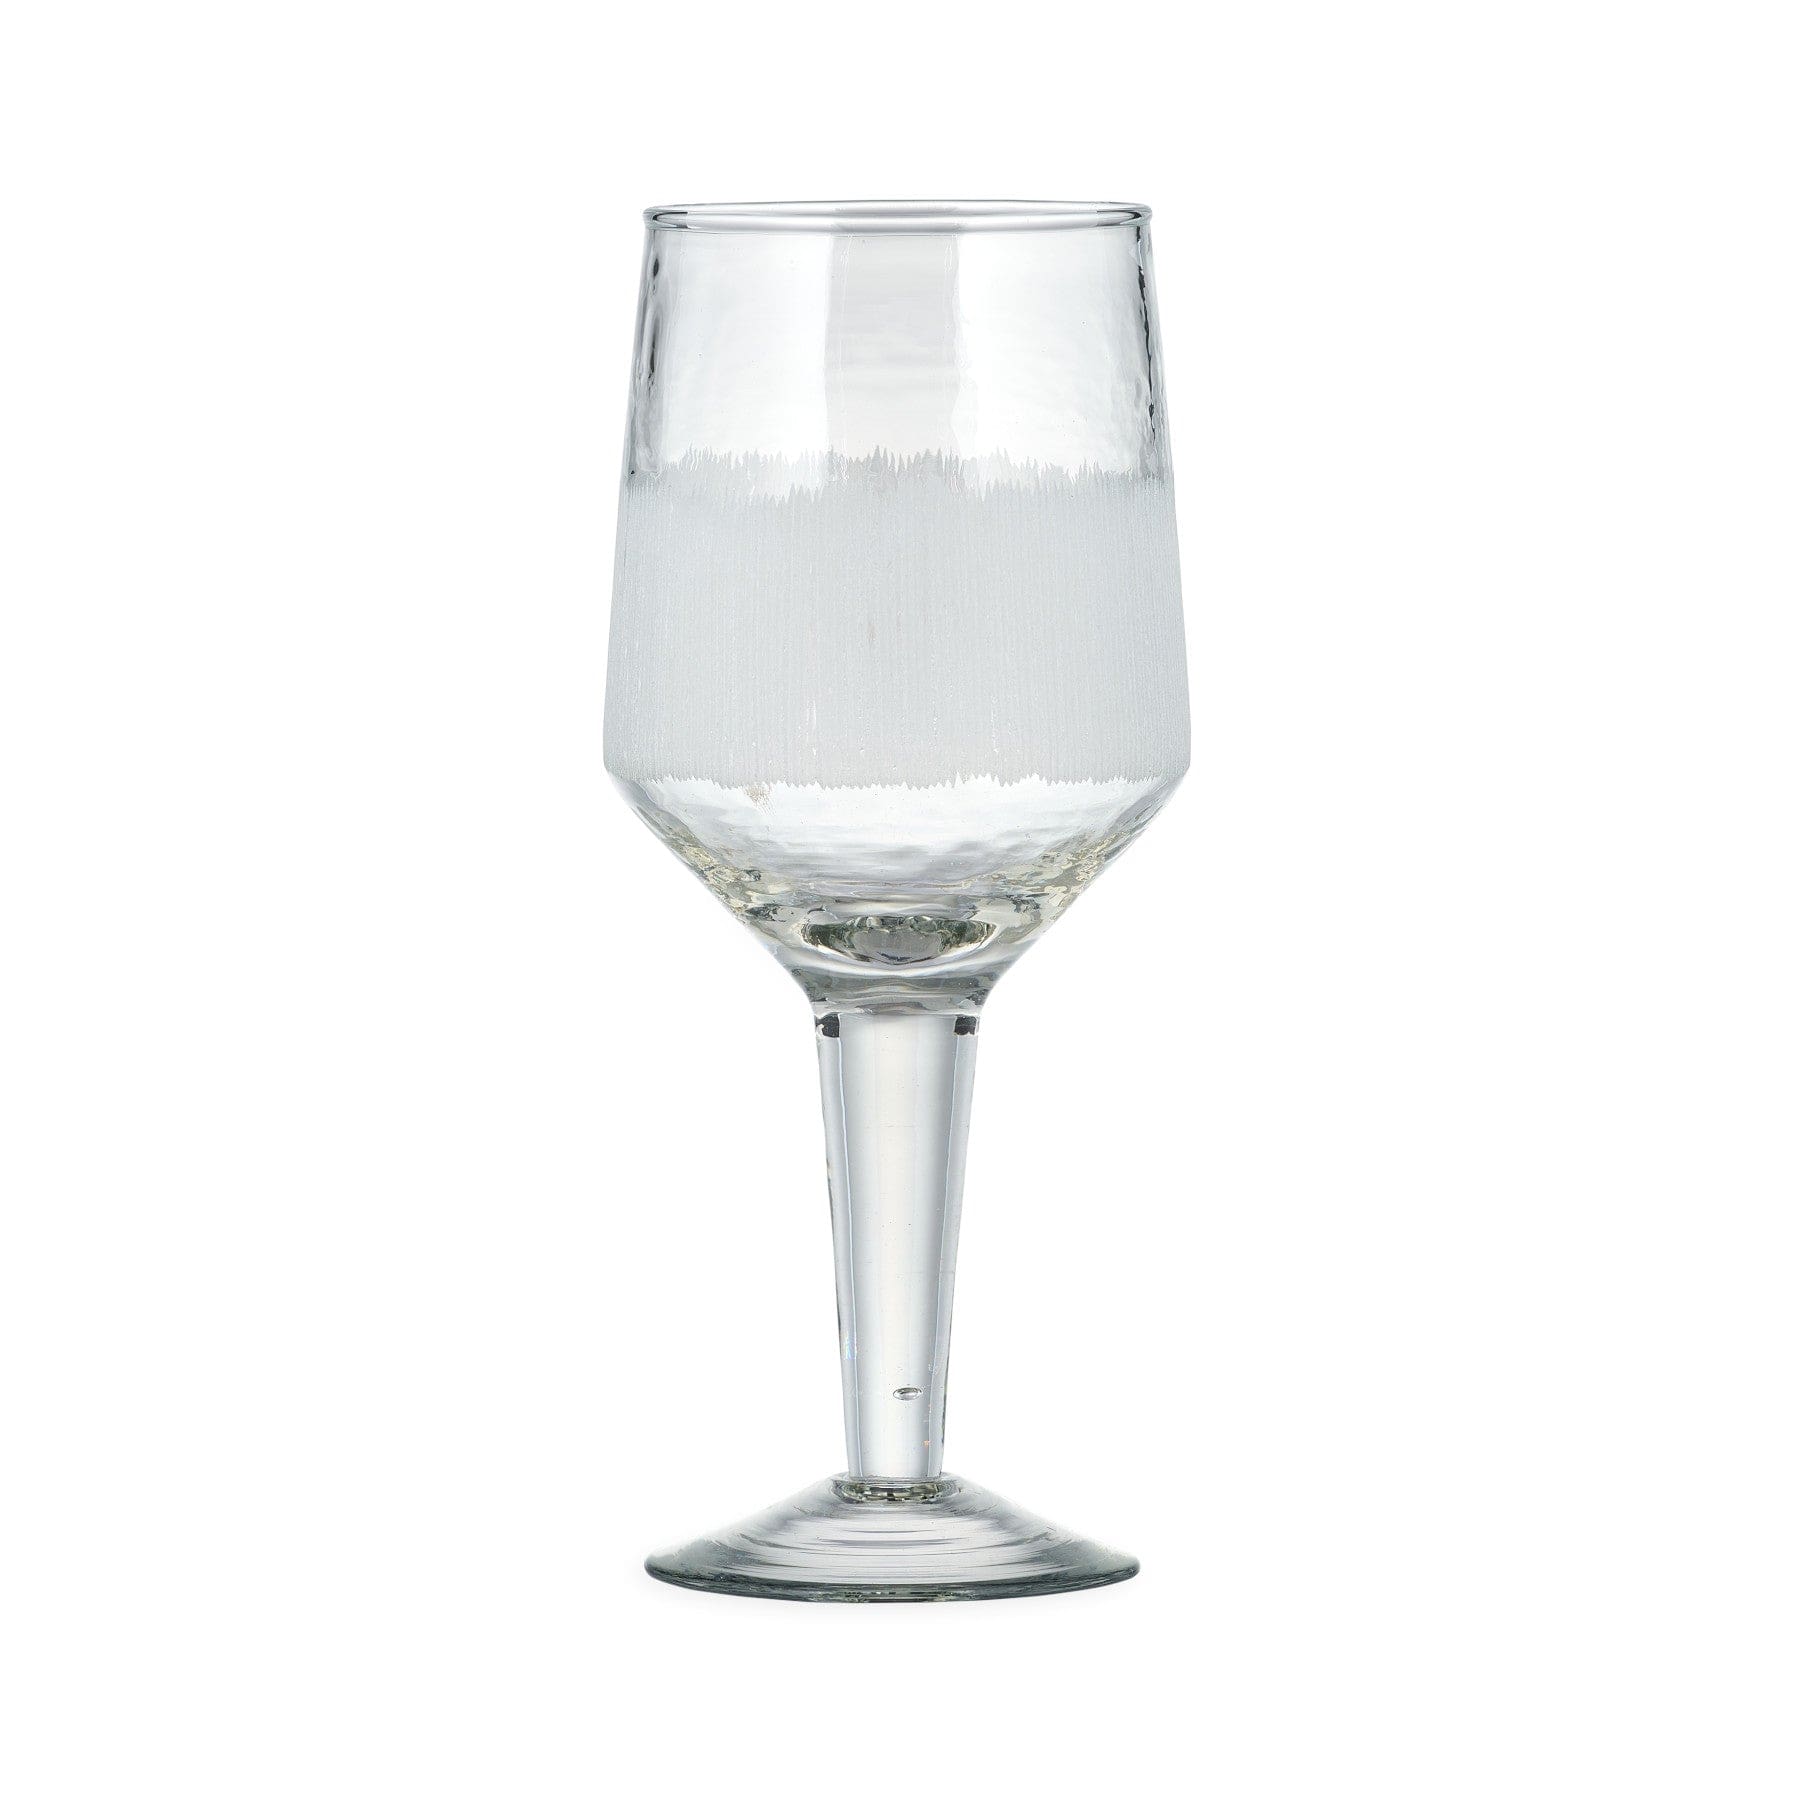 Empty crystal wine glass on white background